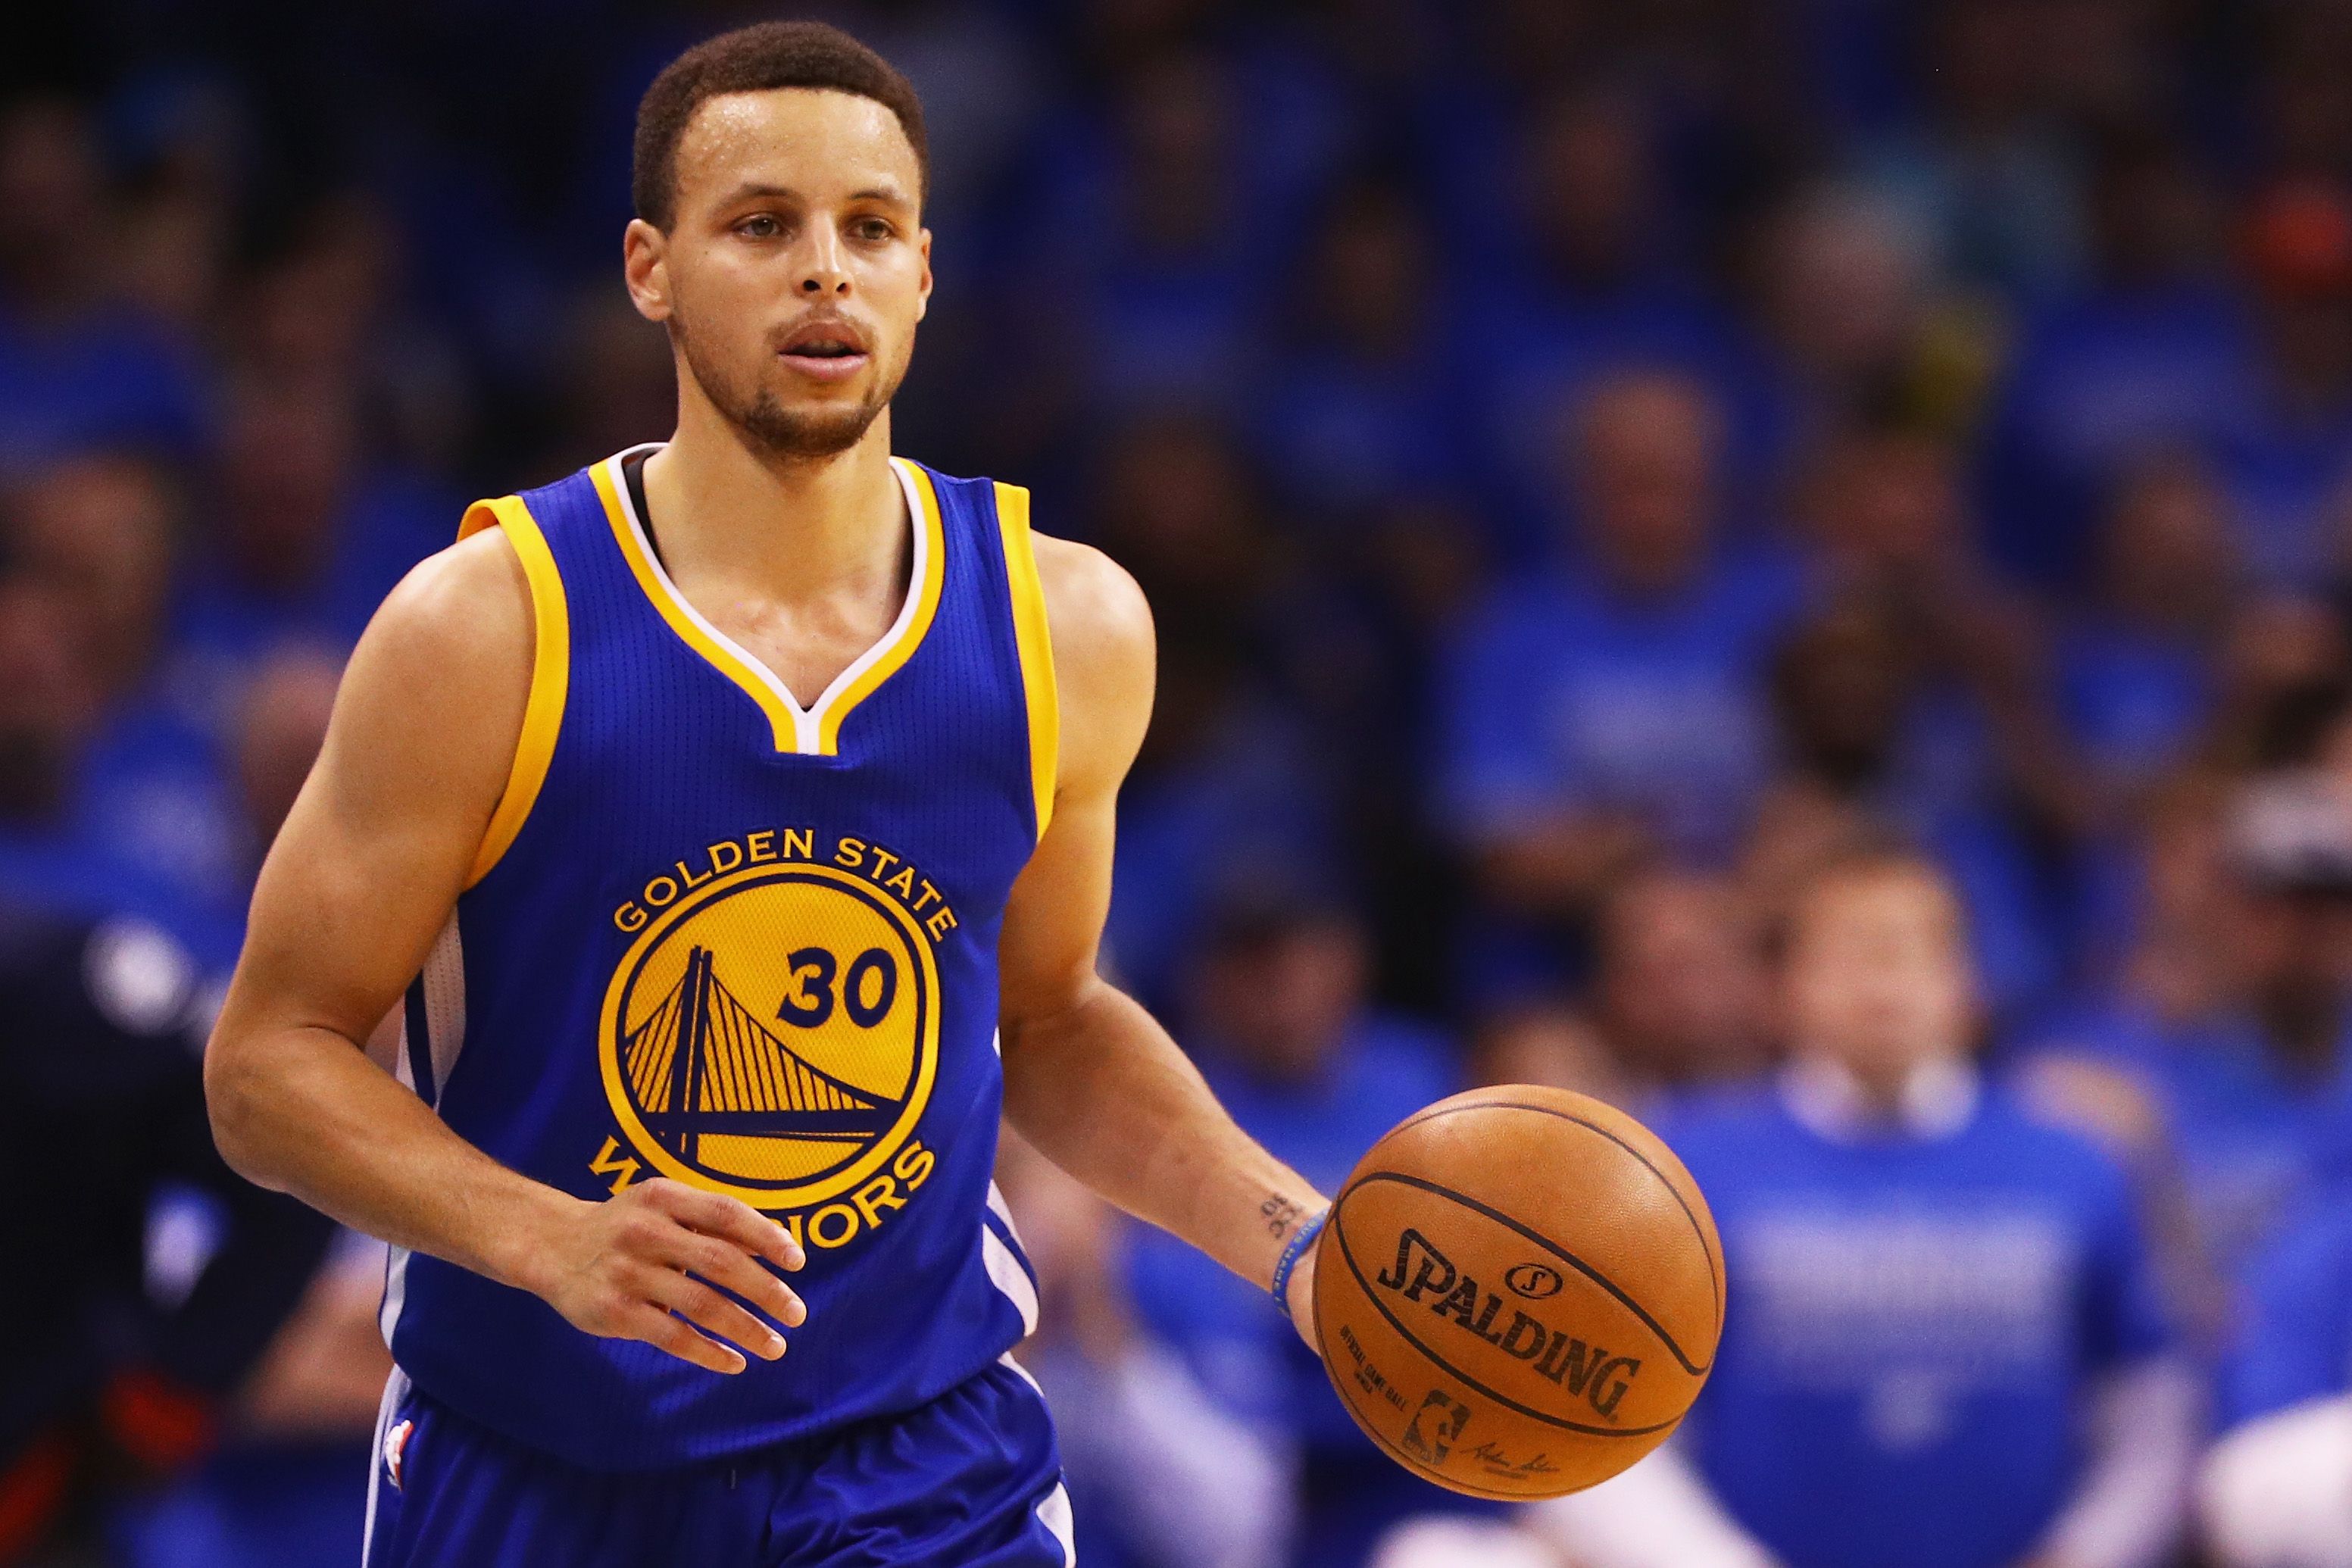 Steph curry dies on March 30 at the 30 minute of the 30 second